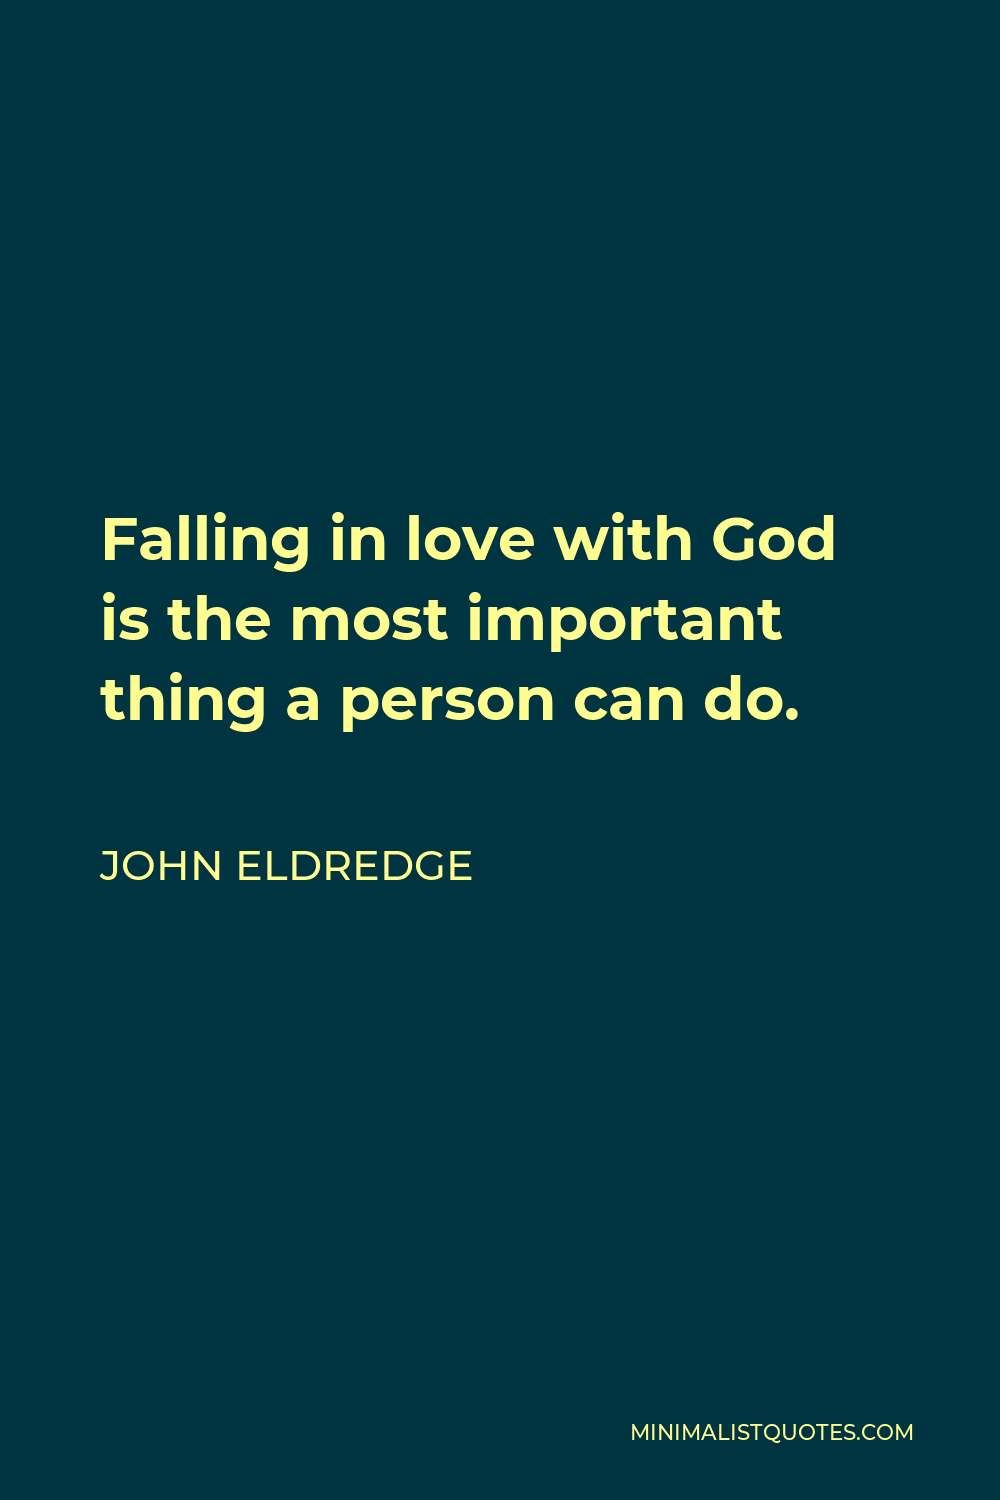 John Eldredge Quote - Falling in love with God is the most important thing a person can do.